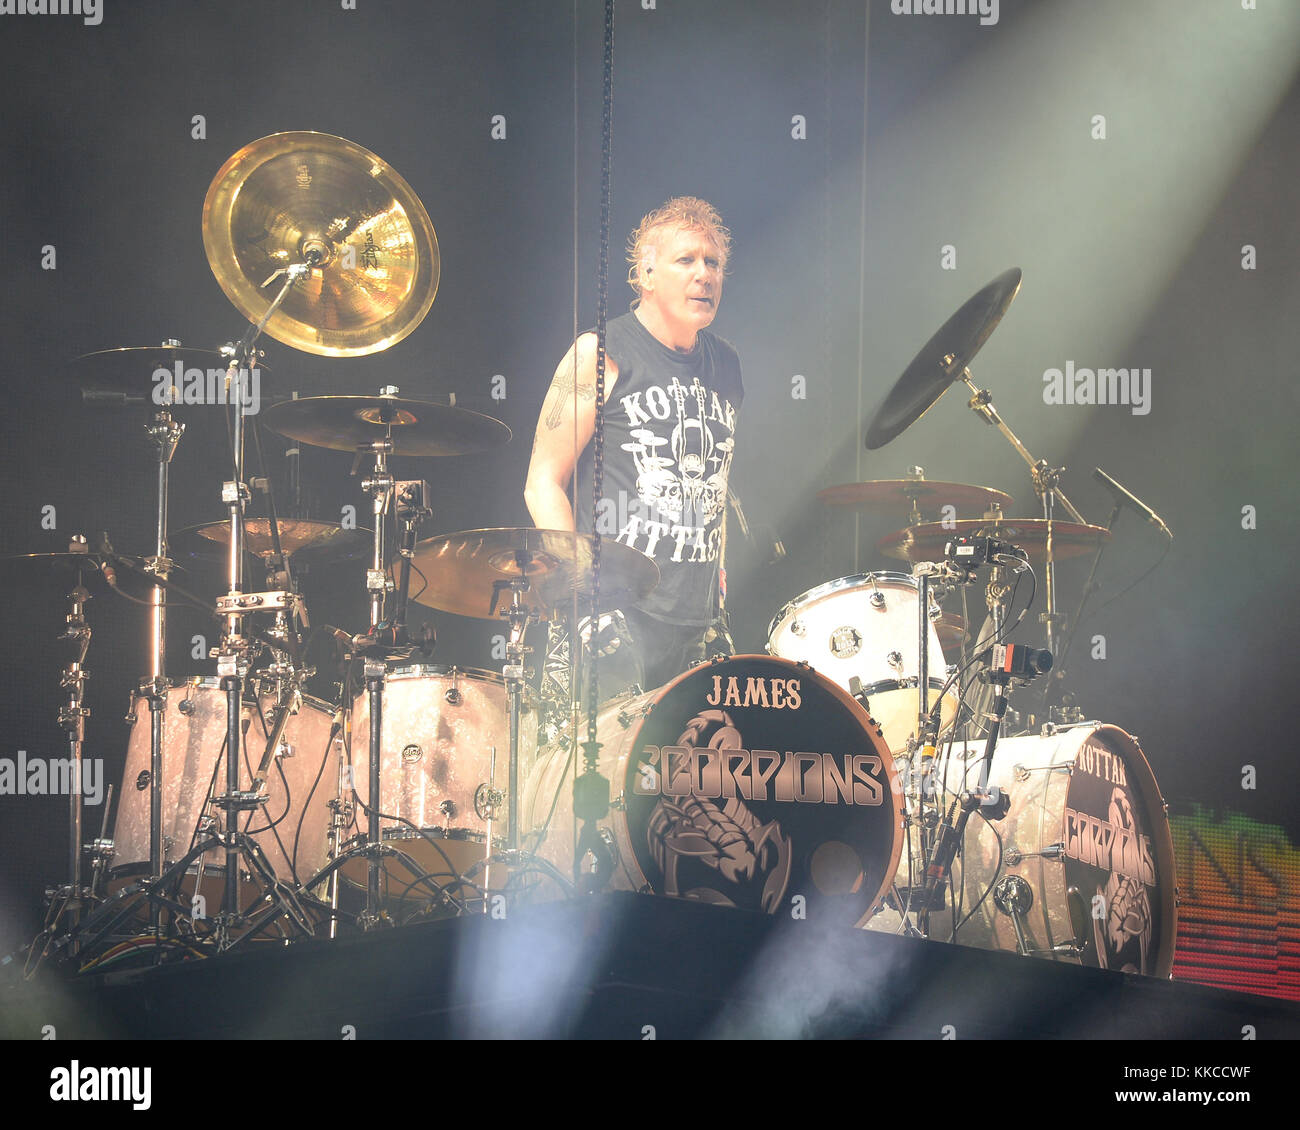 NEW YORK, NY - SEPTEMBER 12: (Embargoed until September 26, 2015) James Kottak of Scorpions performs at the Barclays Center on September 12, 2015 in the Brooklyn borough of New York City.   People:  James Kottak Stock Photo